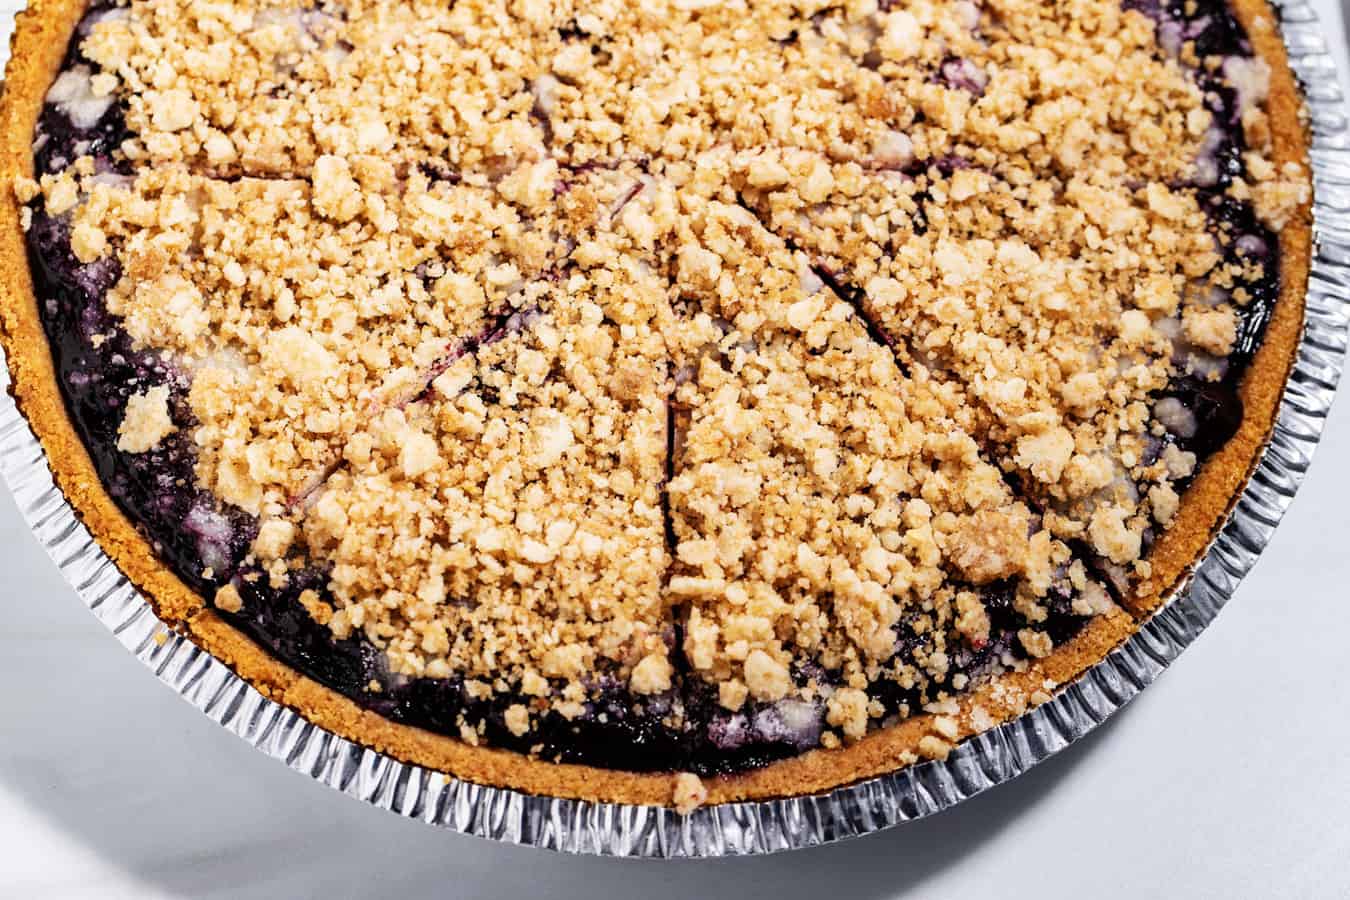 Blueberry pie with premade graham cracker crust and streusel topping cut in quarter slices.